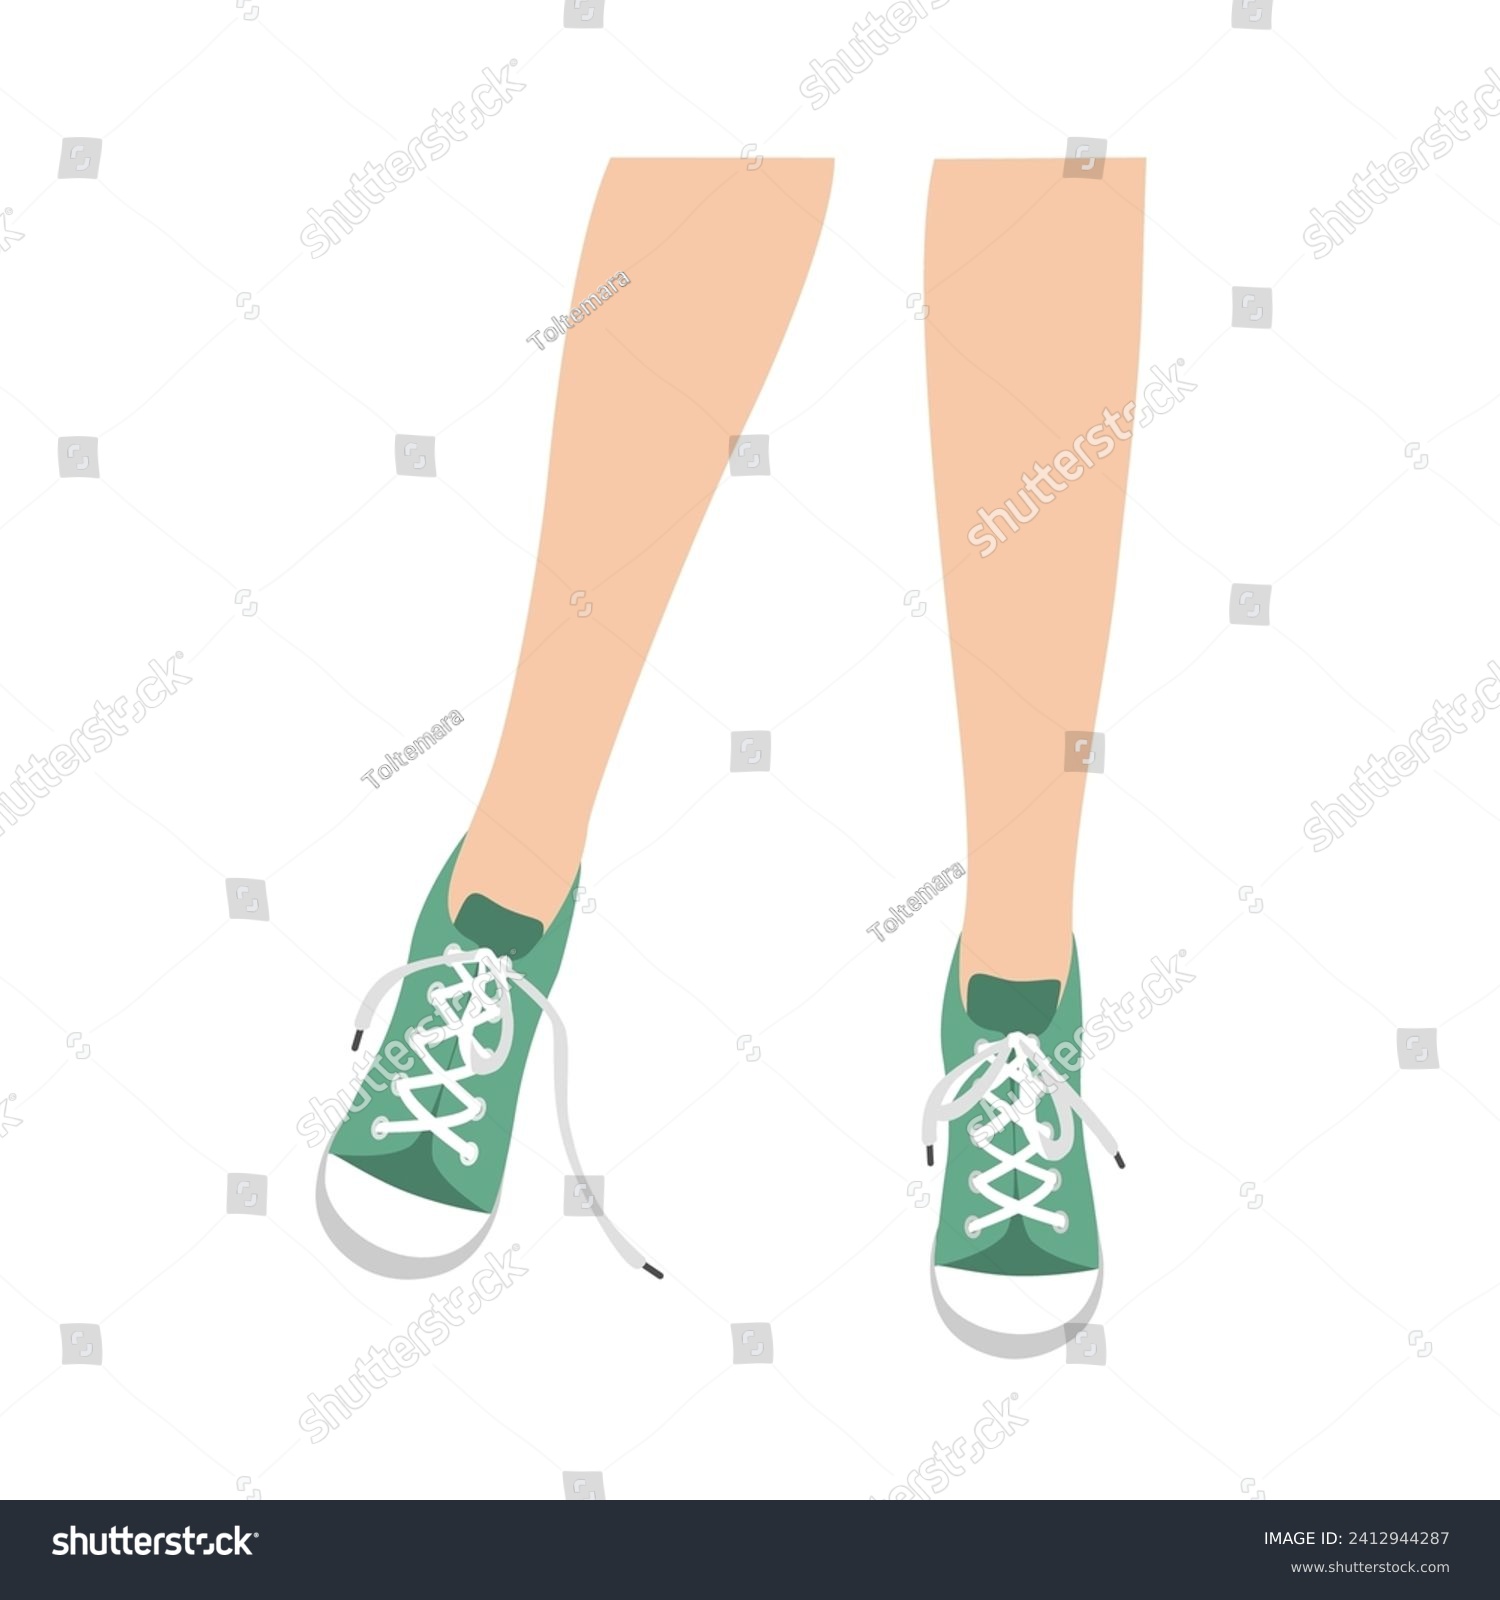 SVG of Woman legs in green sneakers with untied shoelaces. Vector illustration isolated on white background svg